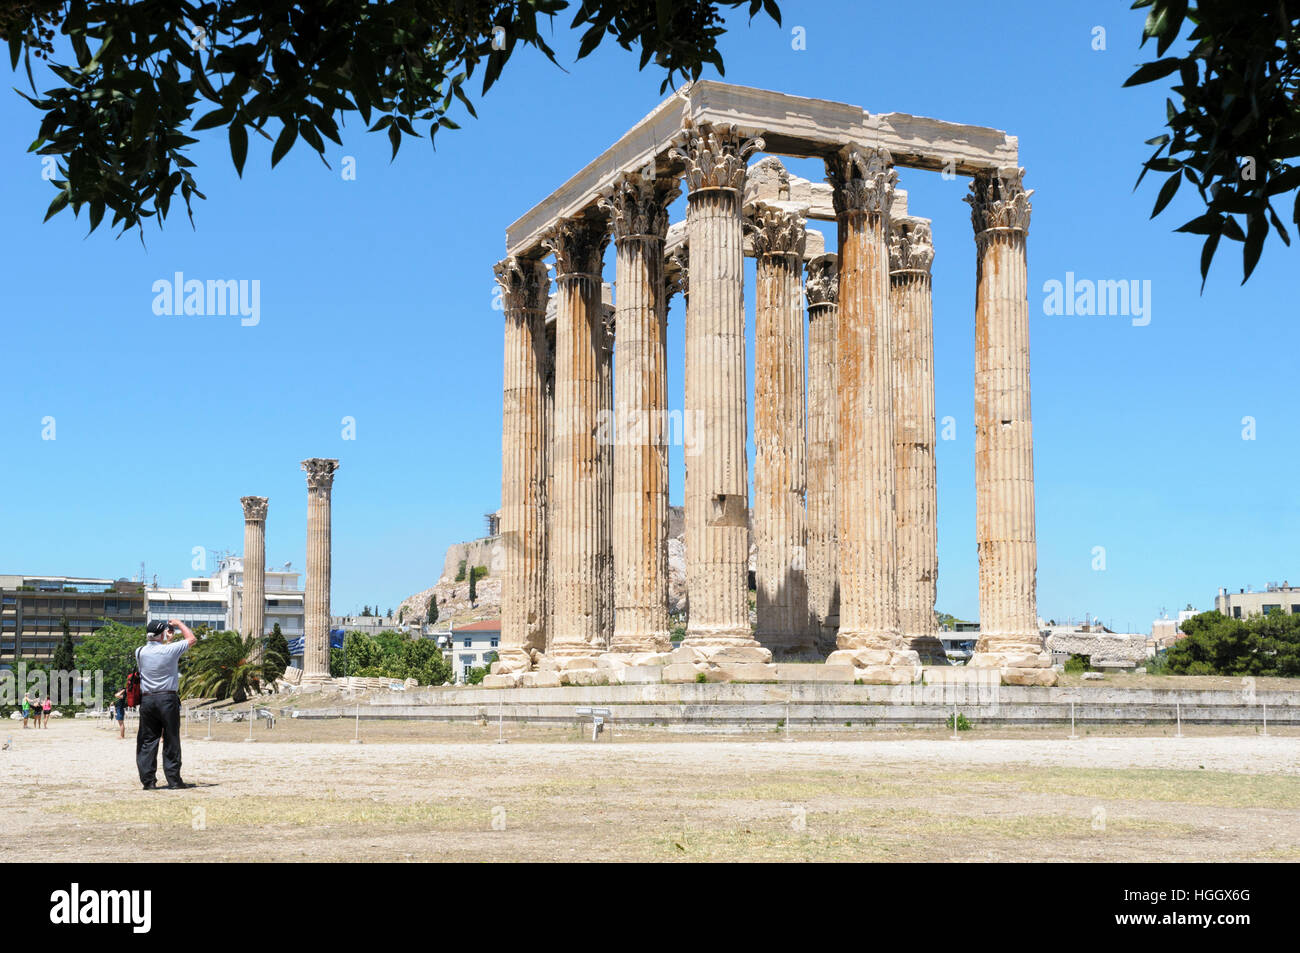 Tourist photographing the Temple of Olympian Zeus, Athens, Greece Stock Photo